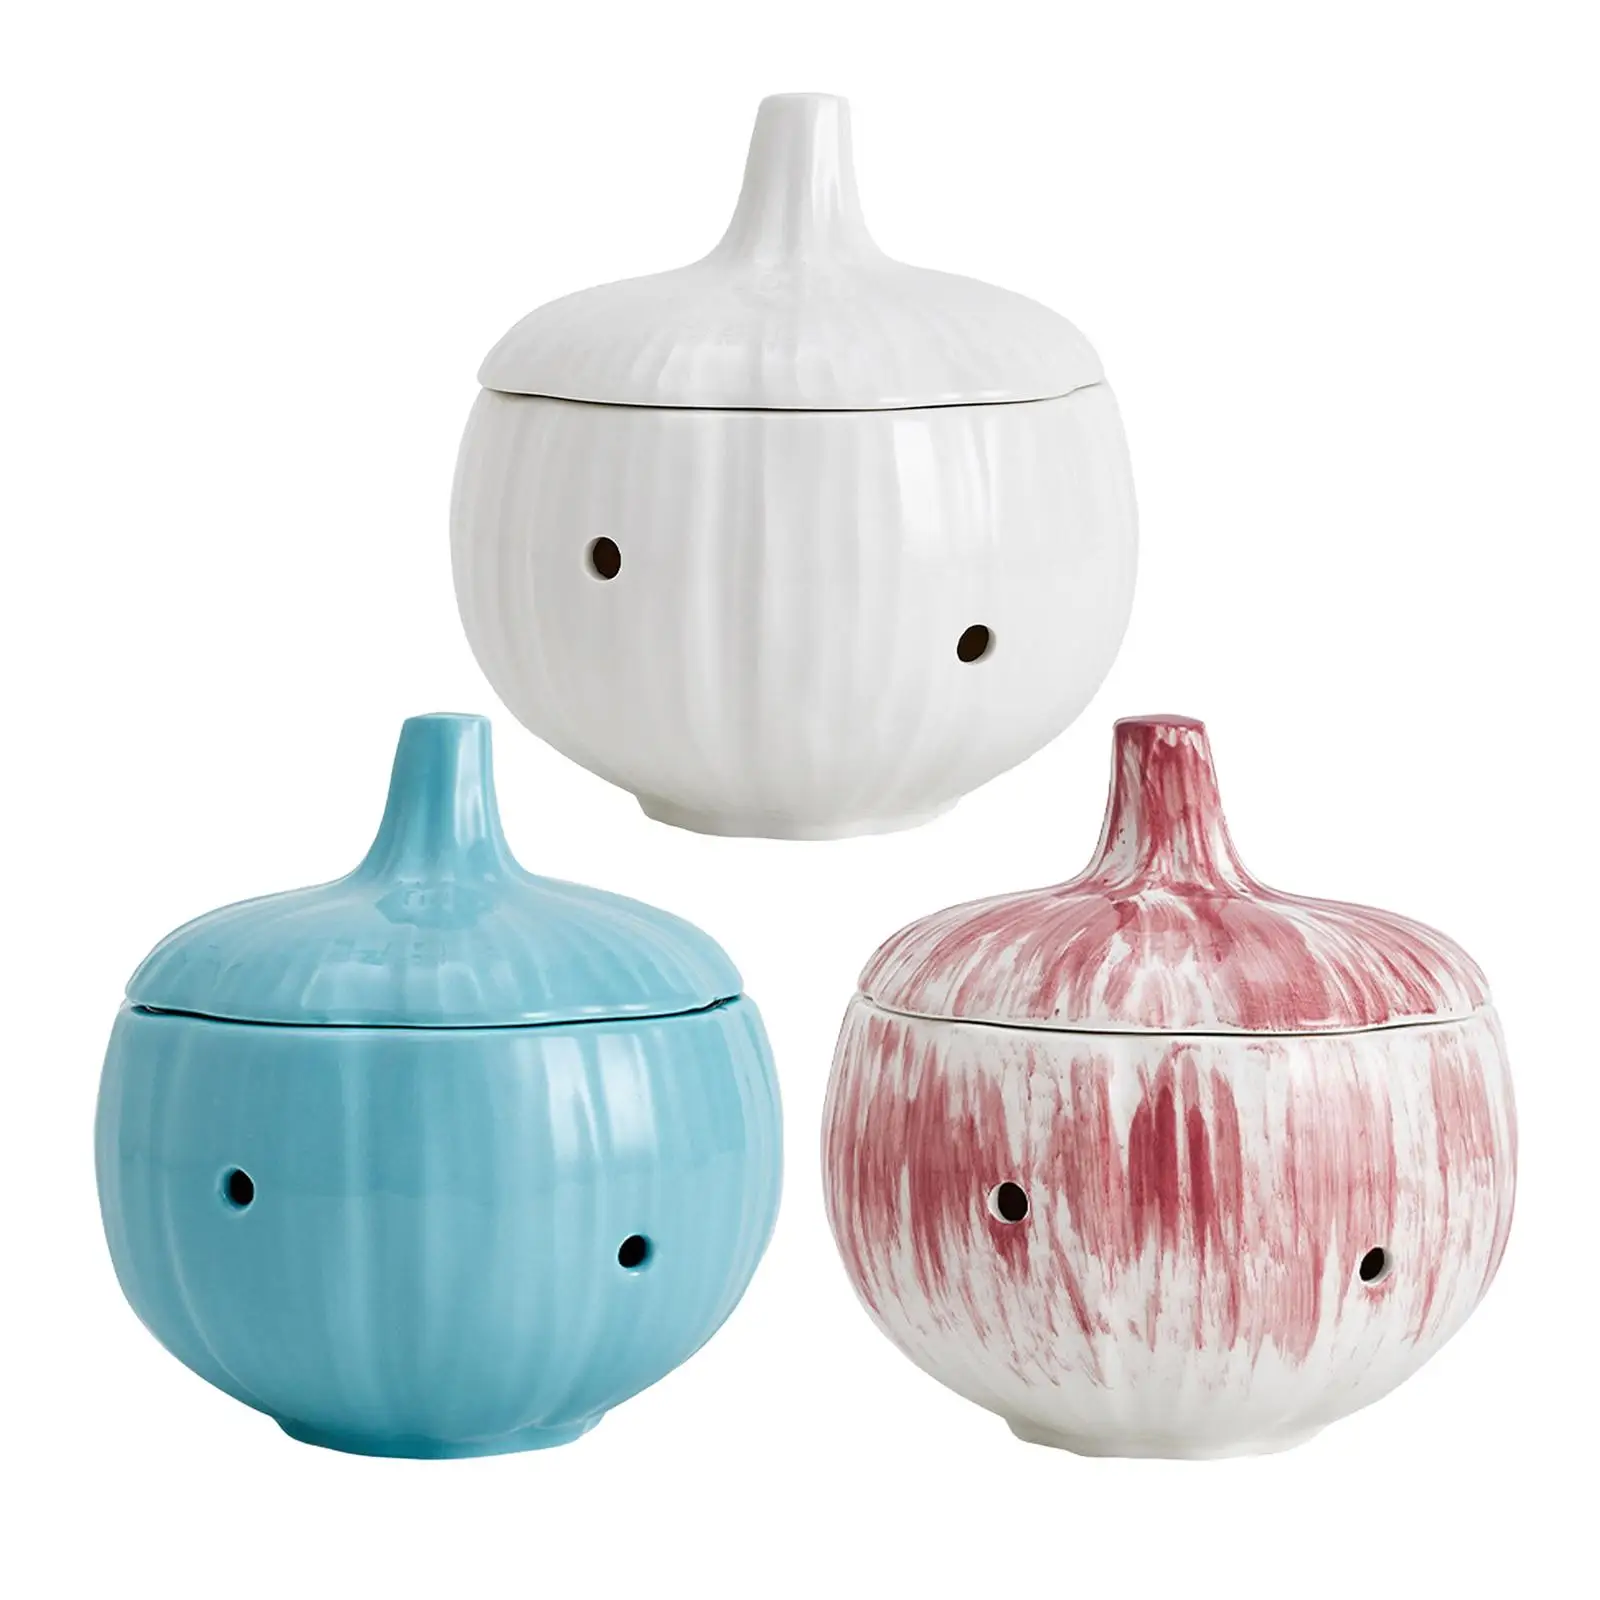 Ceramic Garlic Keeper Garlic Container Saver with Lids Canister Collection Round Holder for Home Kitchen Onion Ginger